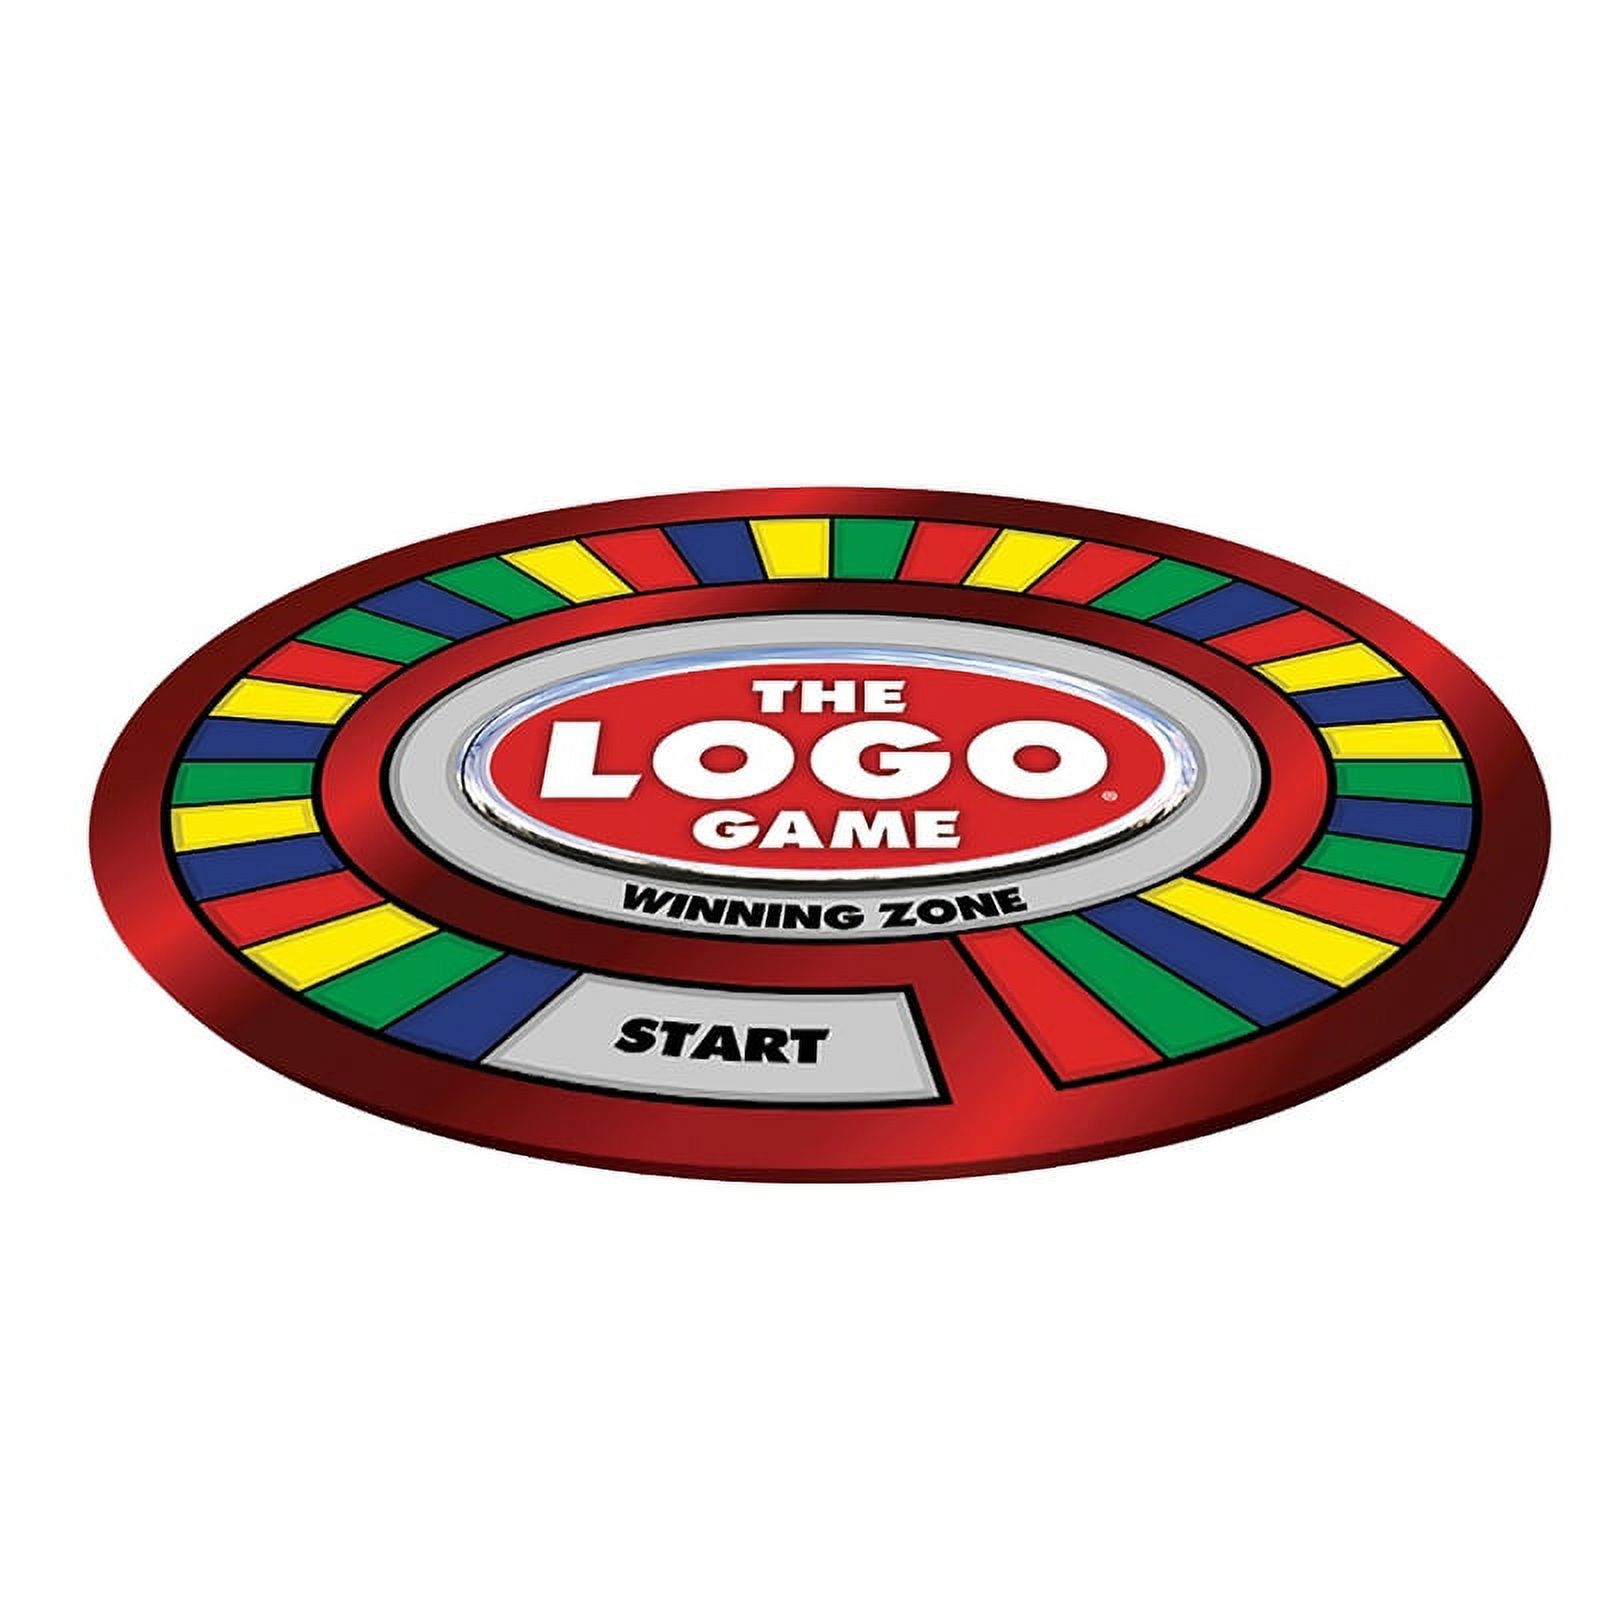 The Logo Game Board Game, Card Game, Kids Game, Family Game Adult Game - image 2 of 2